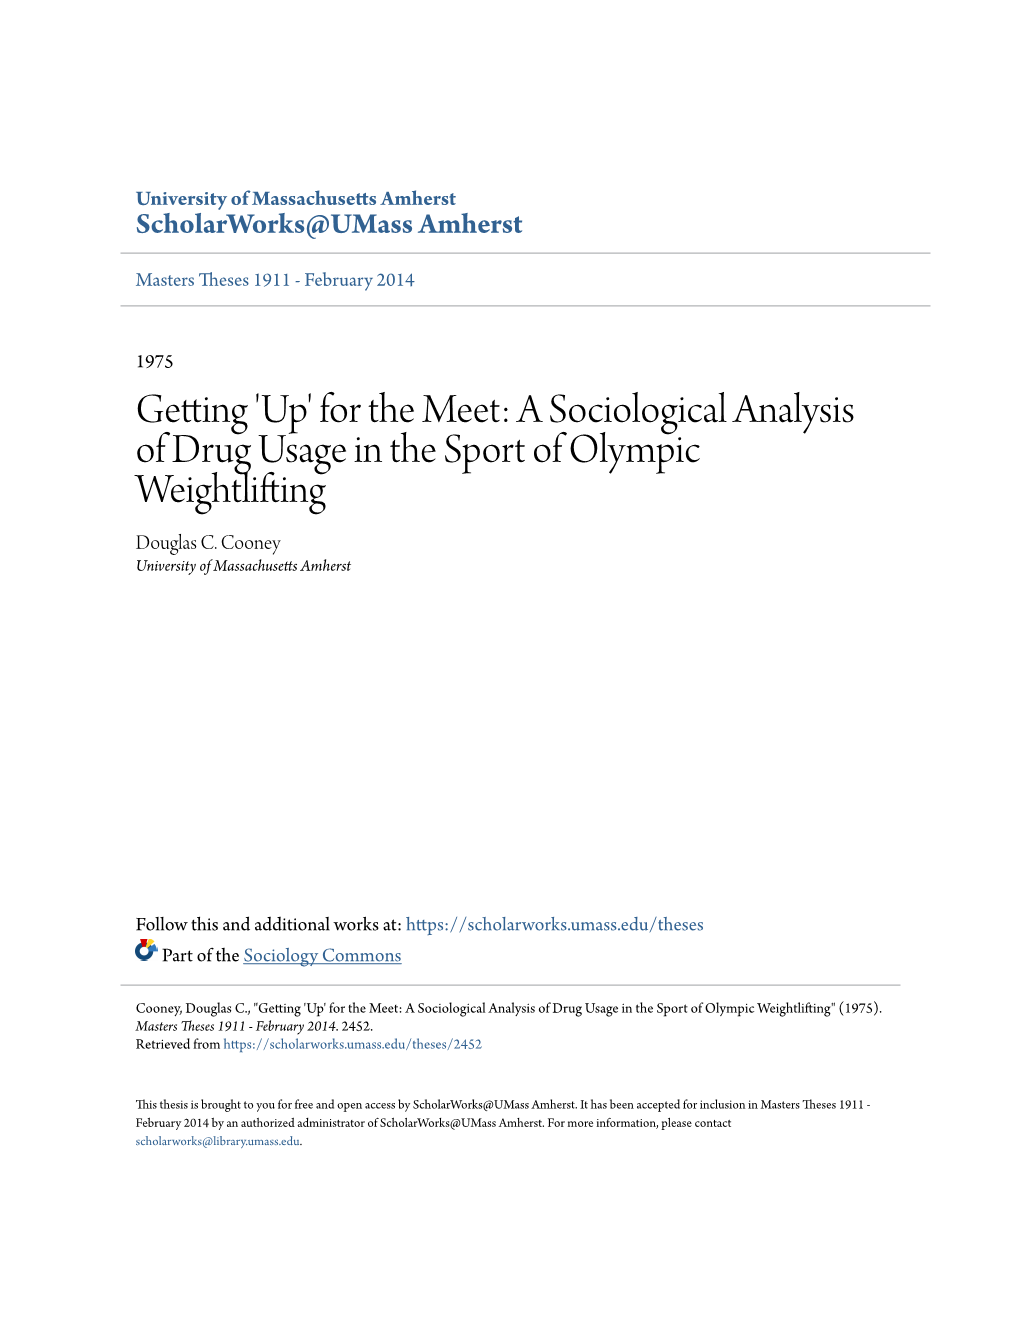 A Sociological Analysis of Drug Usage in the Sport of Olympic Weightlifting Douglas C